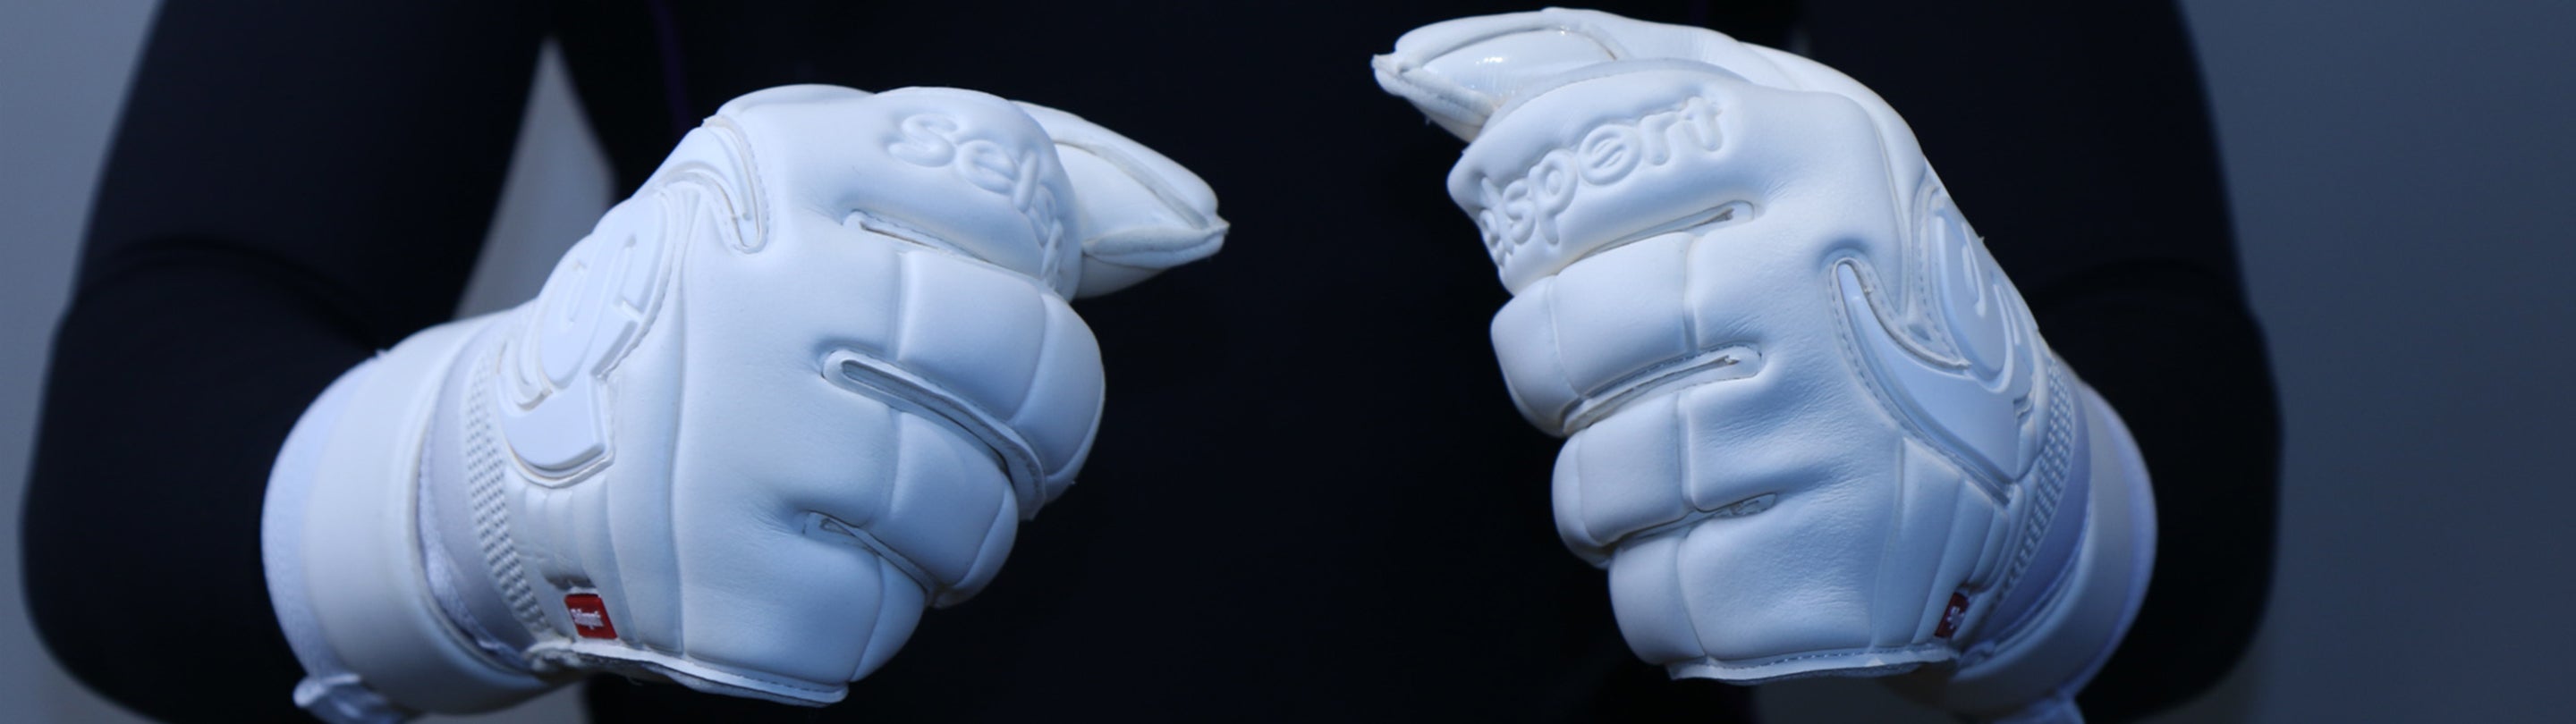 Pair of hands with Selsport Wrappa Phantom white goalkeeper gloves made into fists